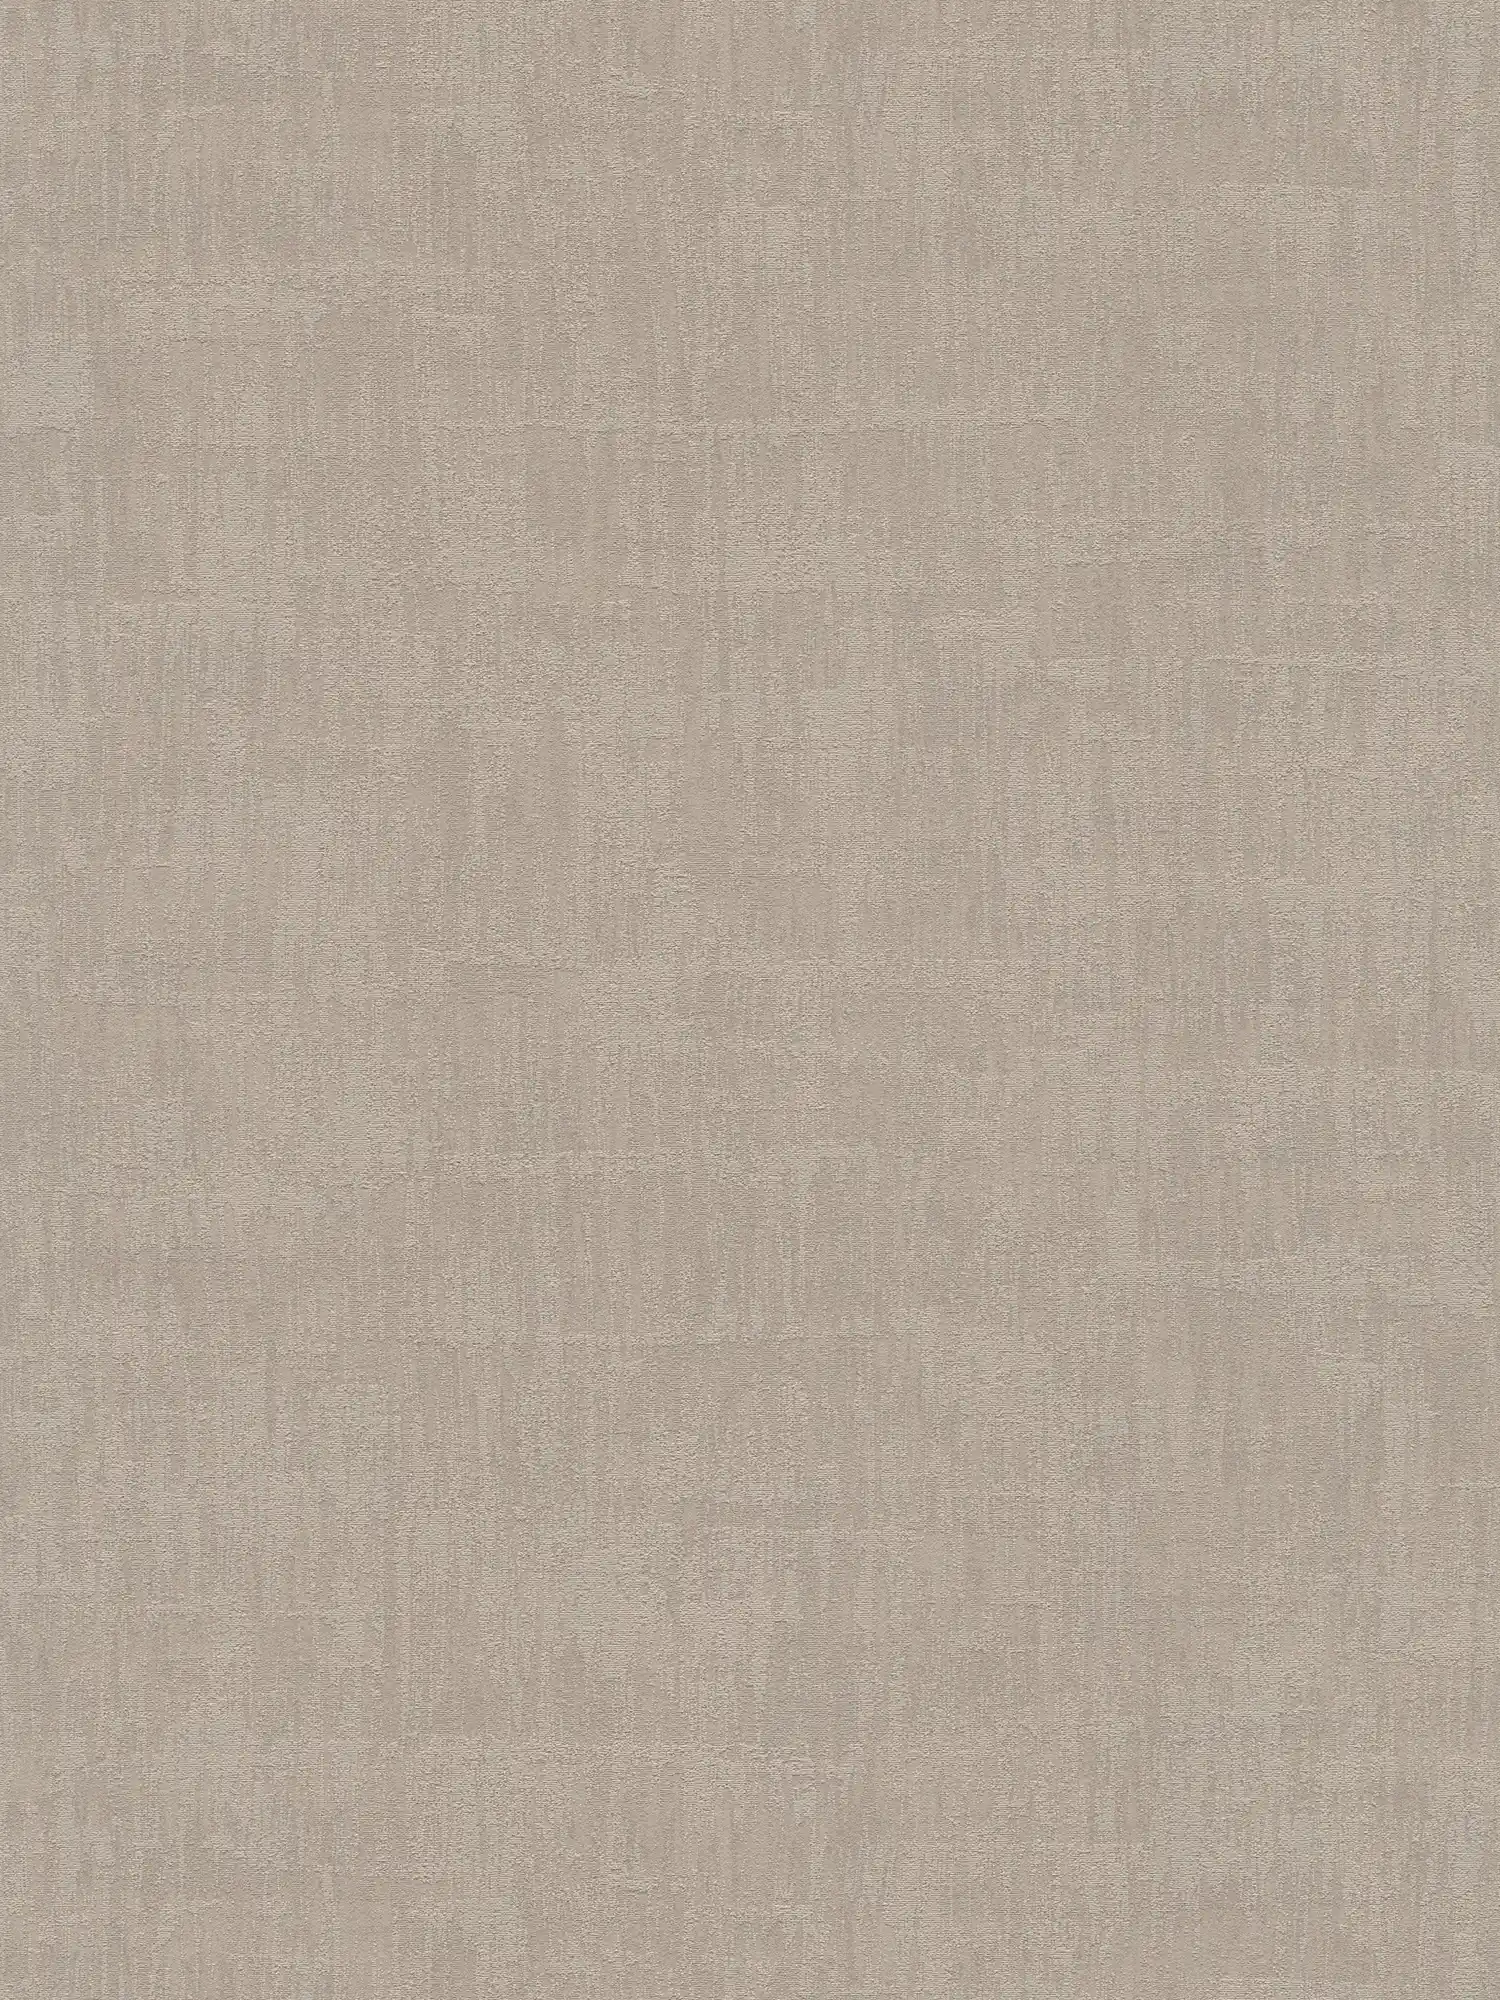 Used look wallpaper with raffia pattern - grey
